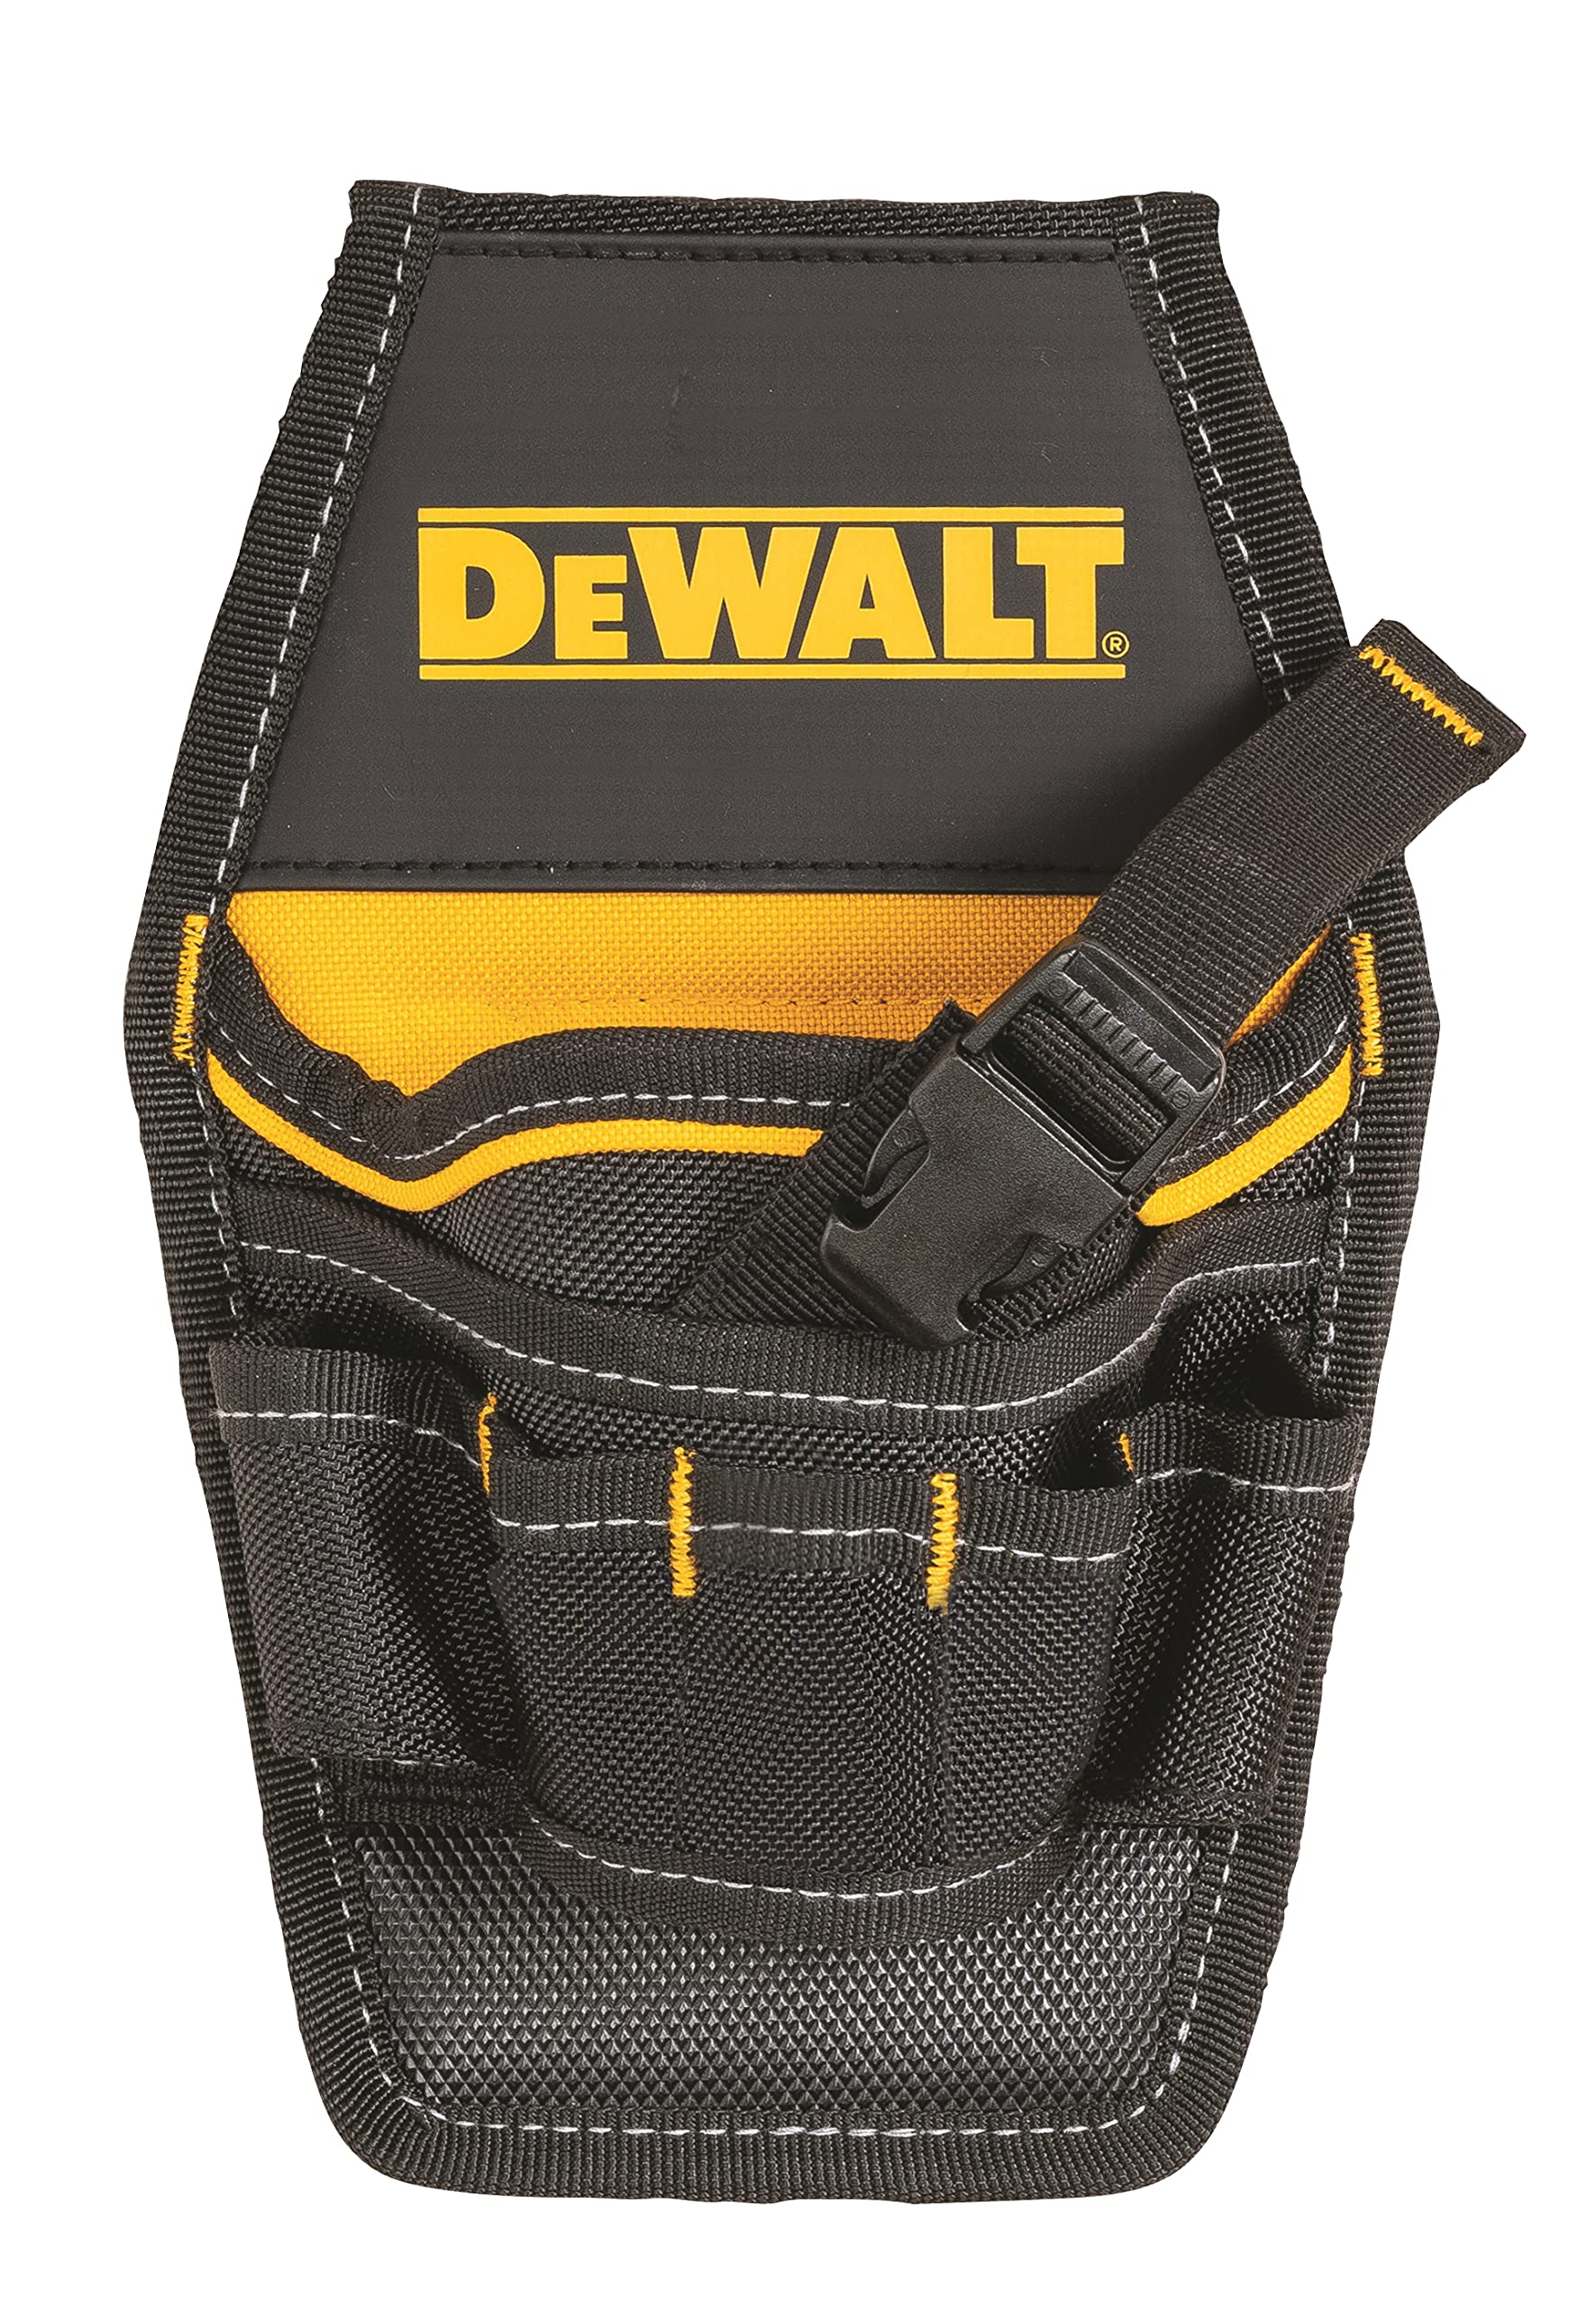 Dewalt Heavy-Duty Impact Driver Holster $9 + Free Shipping w/ Prime or on orders $35+